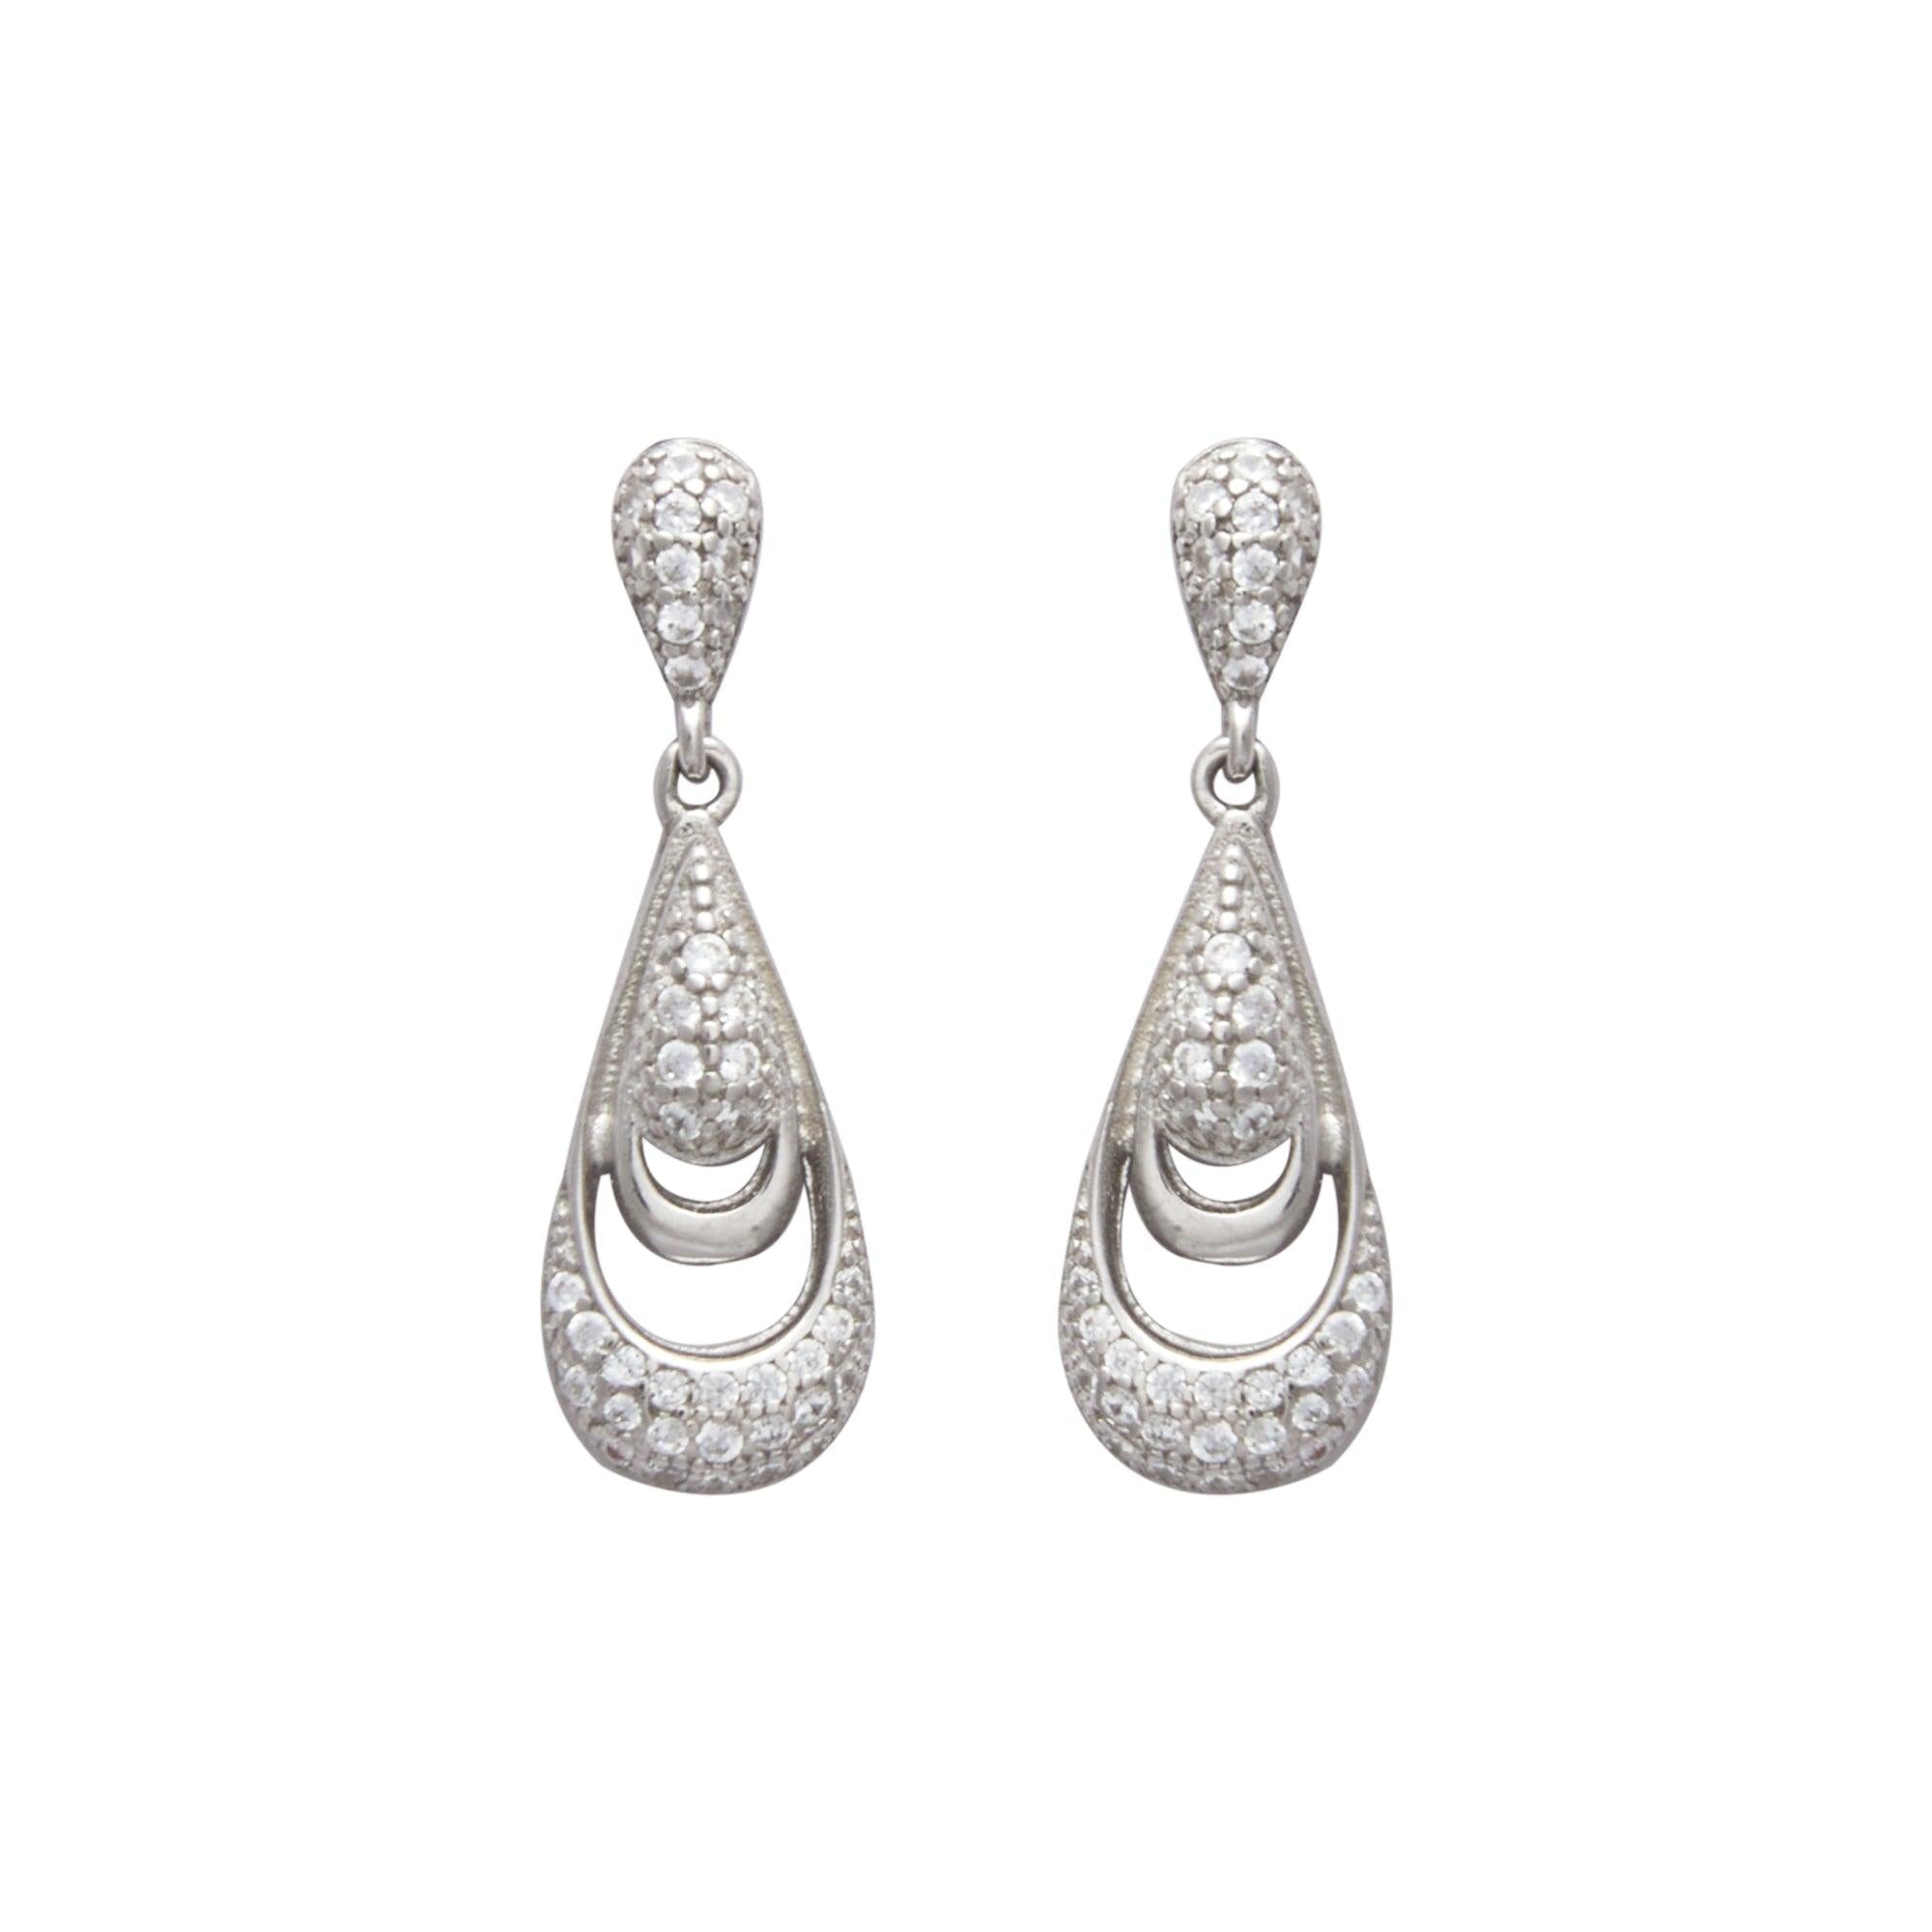 925 Sterling Silver Water Drop Moissanite Diamond Dangle Earrings Perfect  Wedding Promise Moissanite Jewelry Gift For Women From Simplefashion,  $34.79 | DHgate.Com